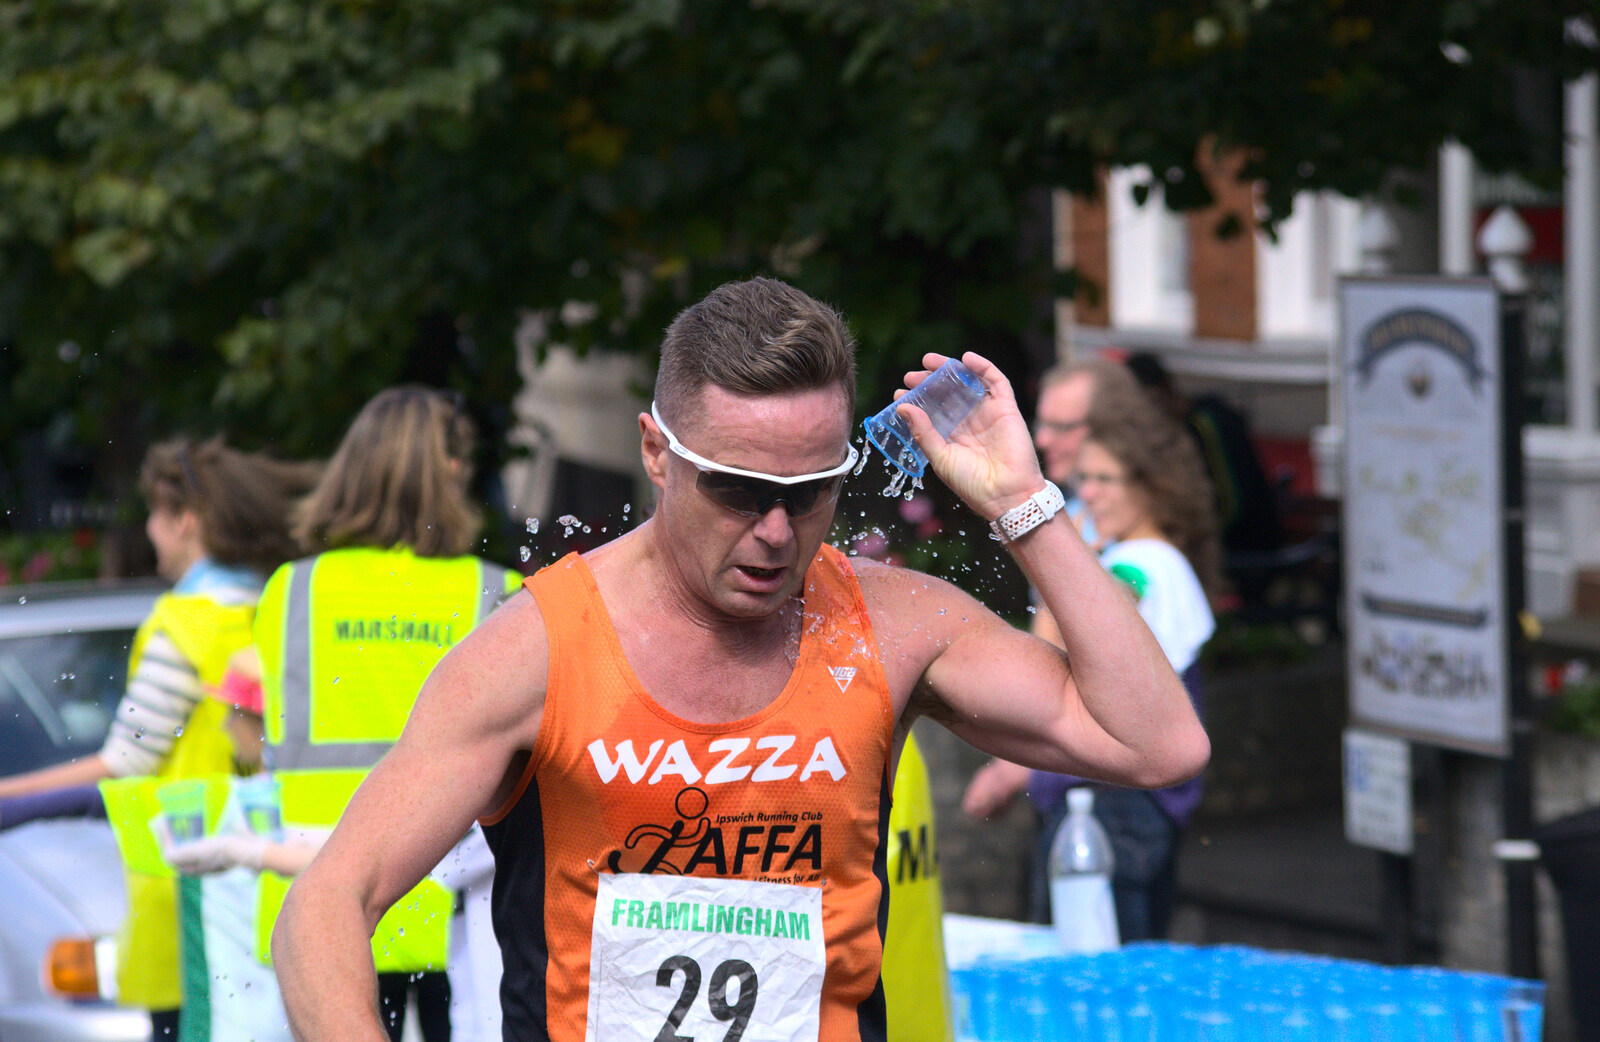 'Wazza' misses his mouth by a bit from The Framlingham 10k Run, Suffolk - 31st August 2014